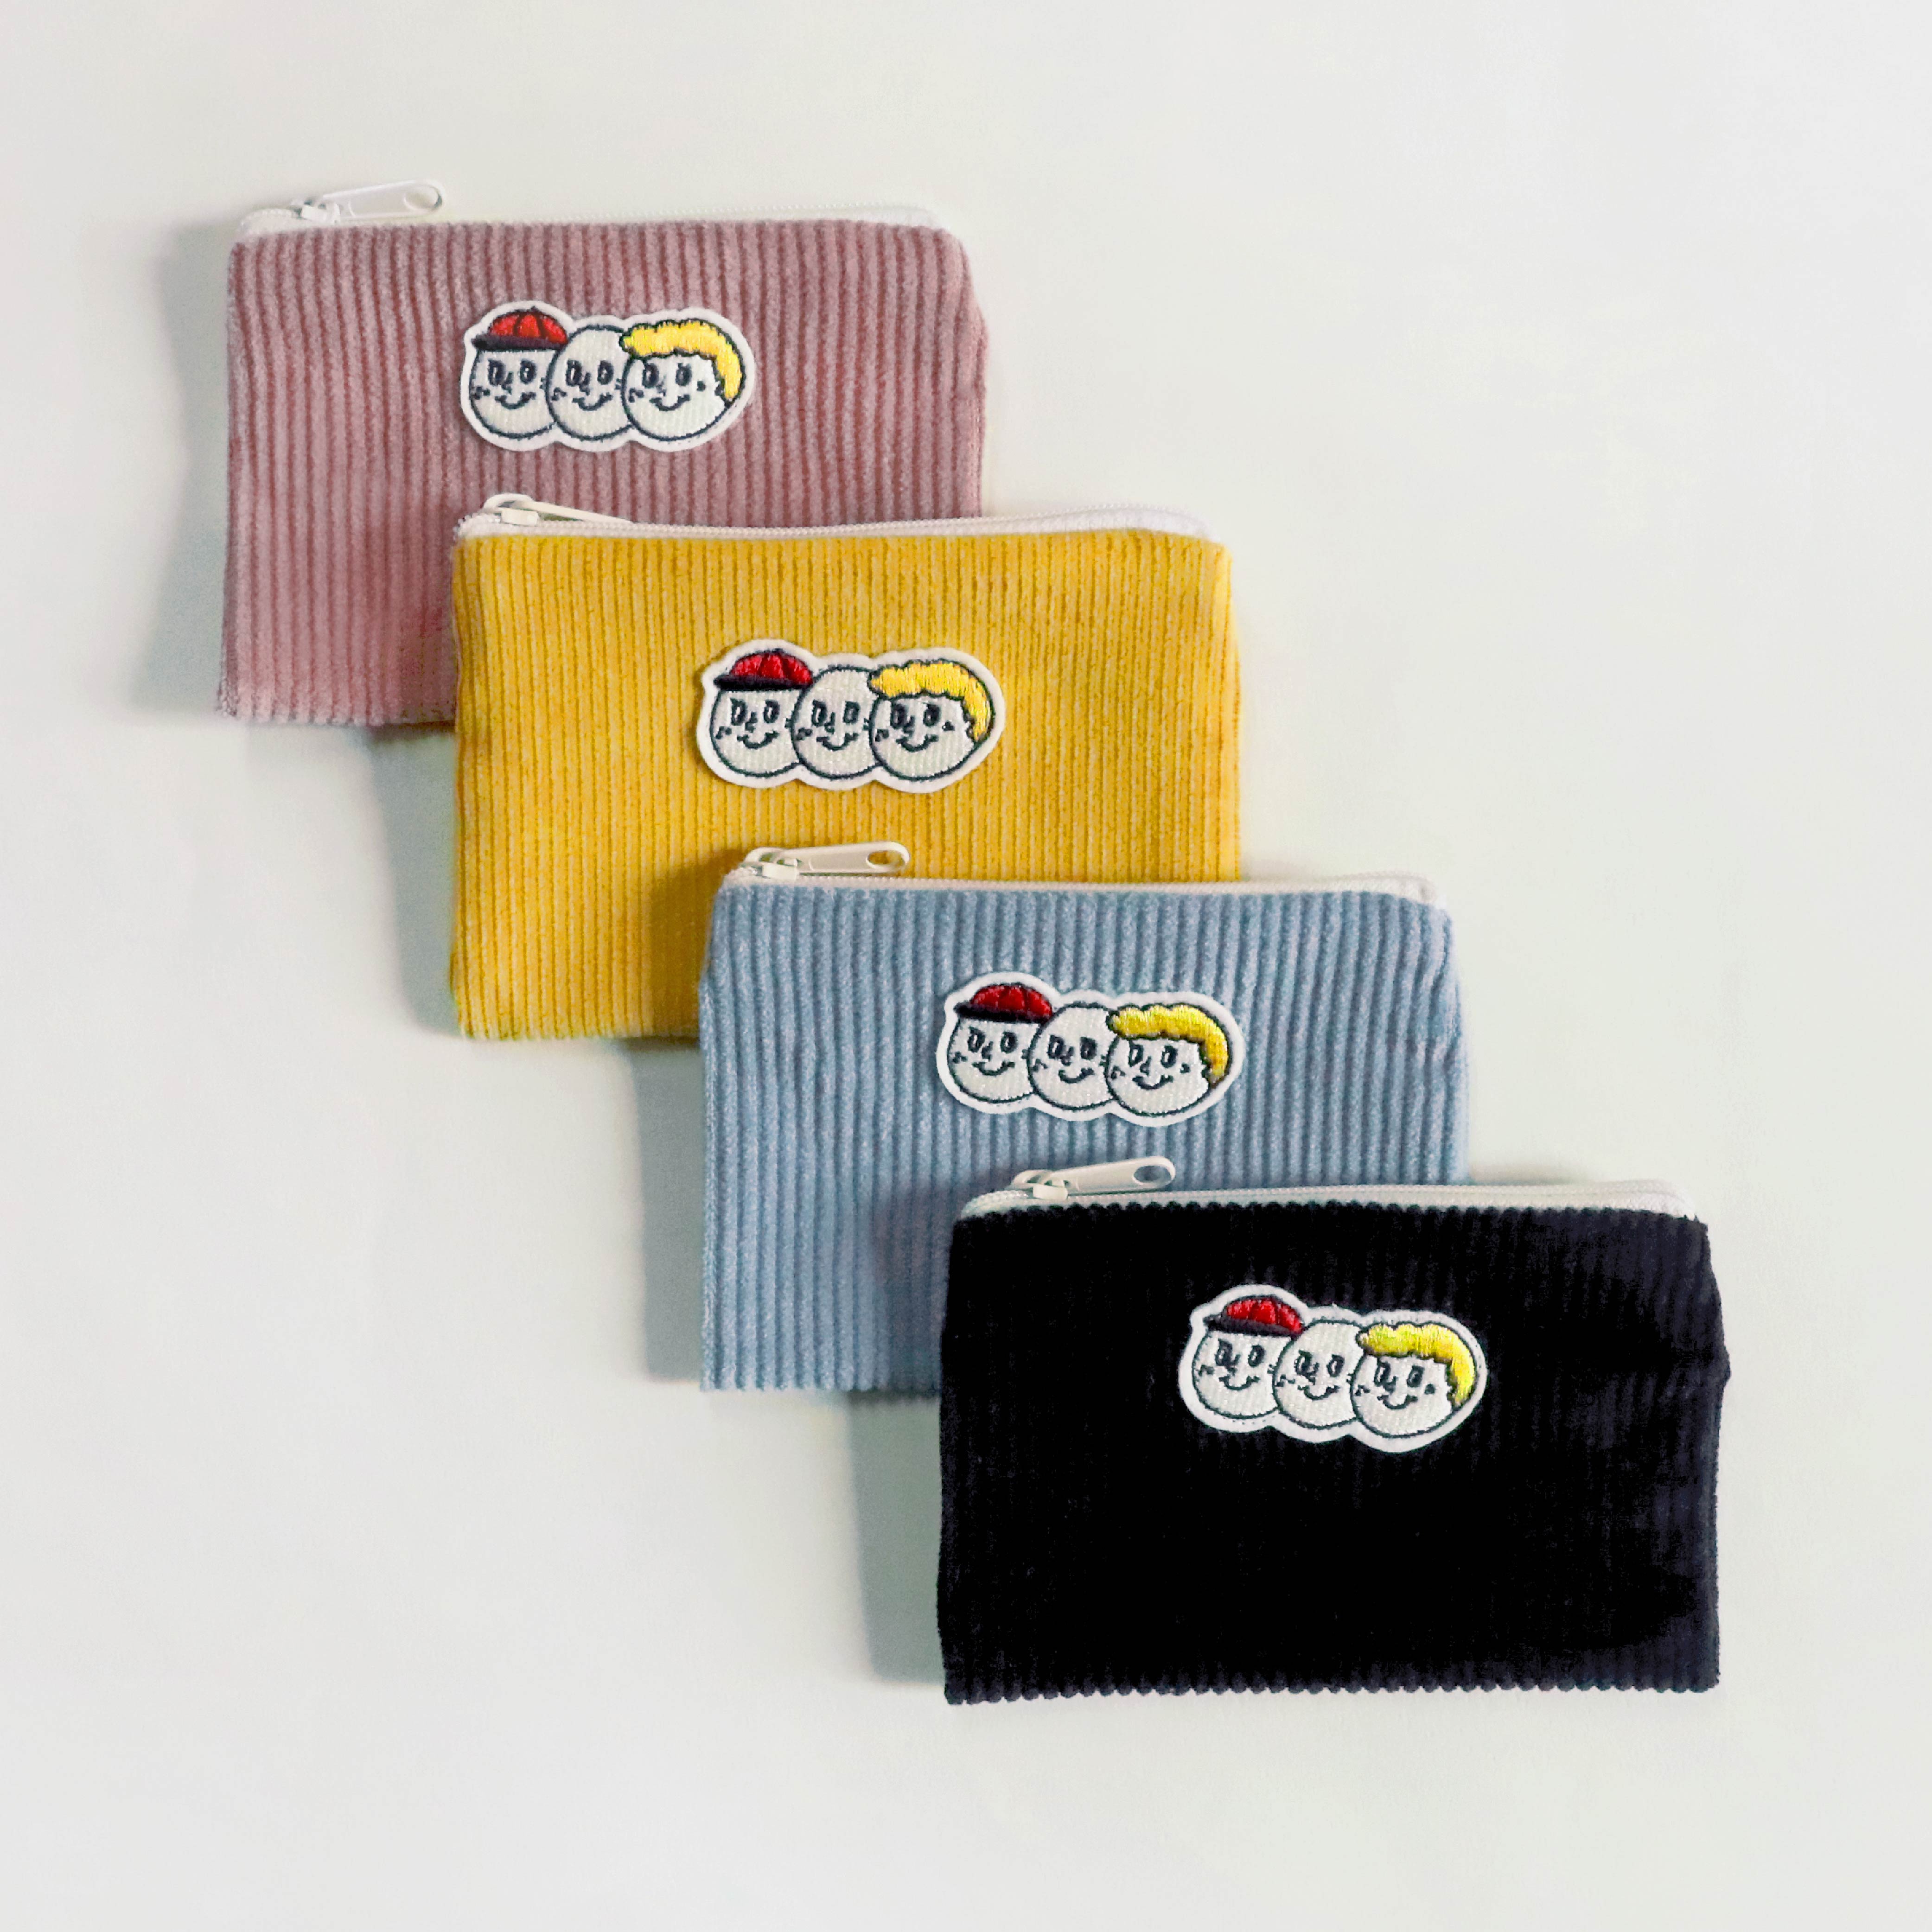 [Pouch] Handy pouch_Corduroy